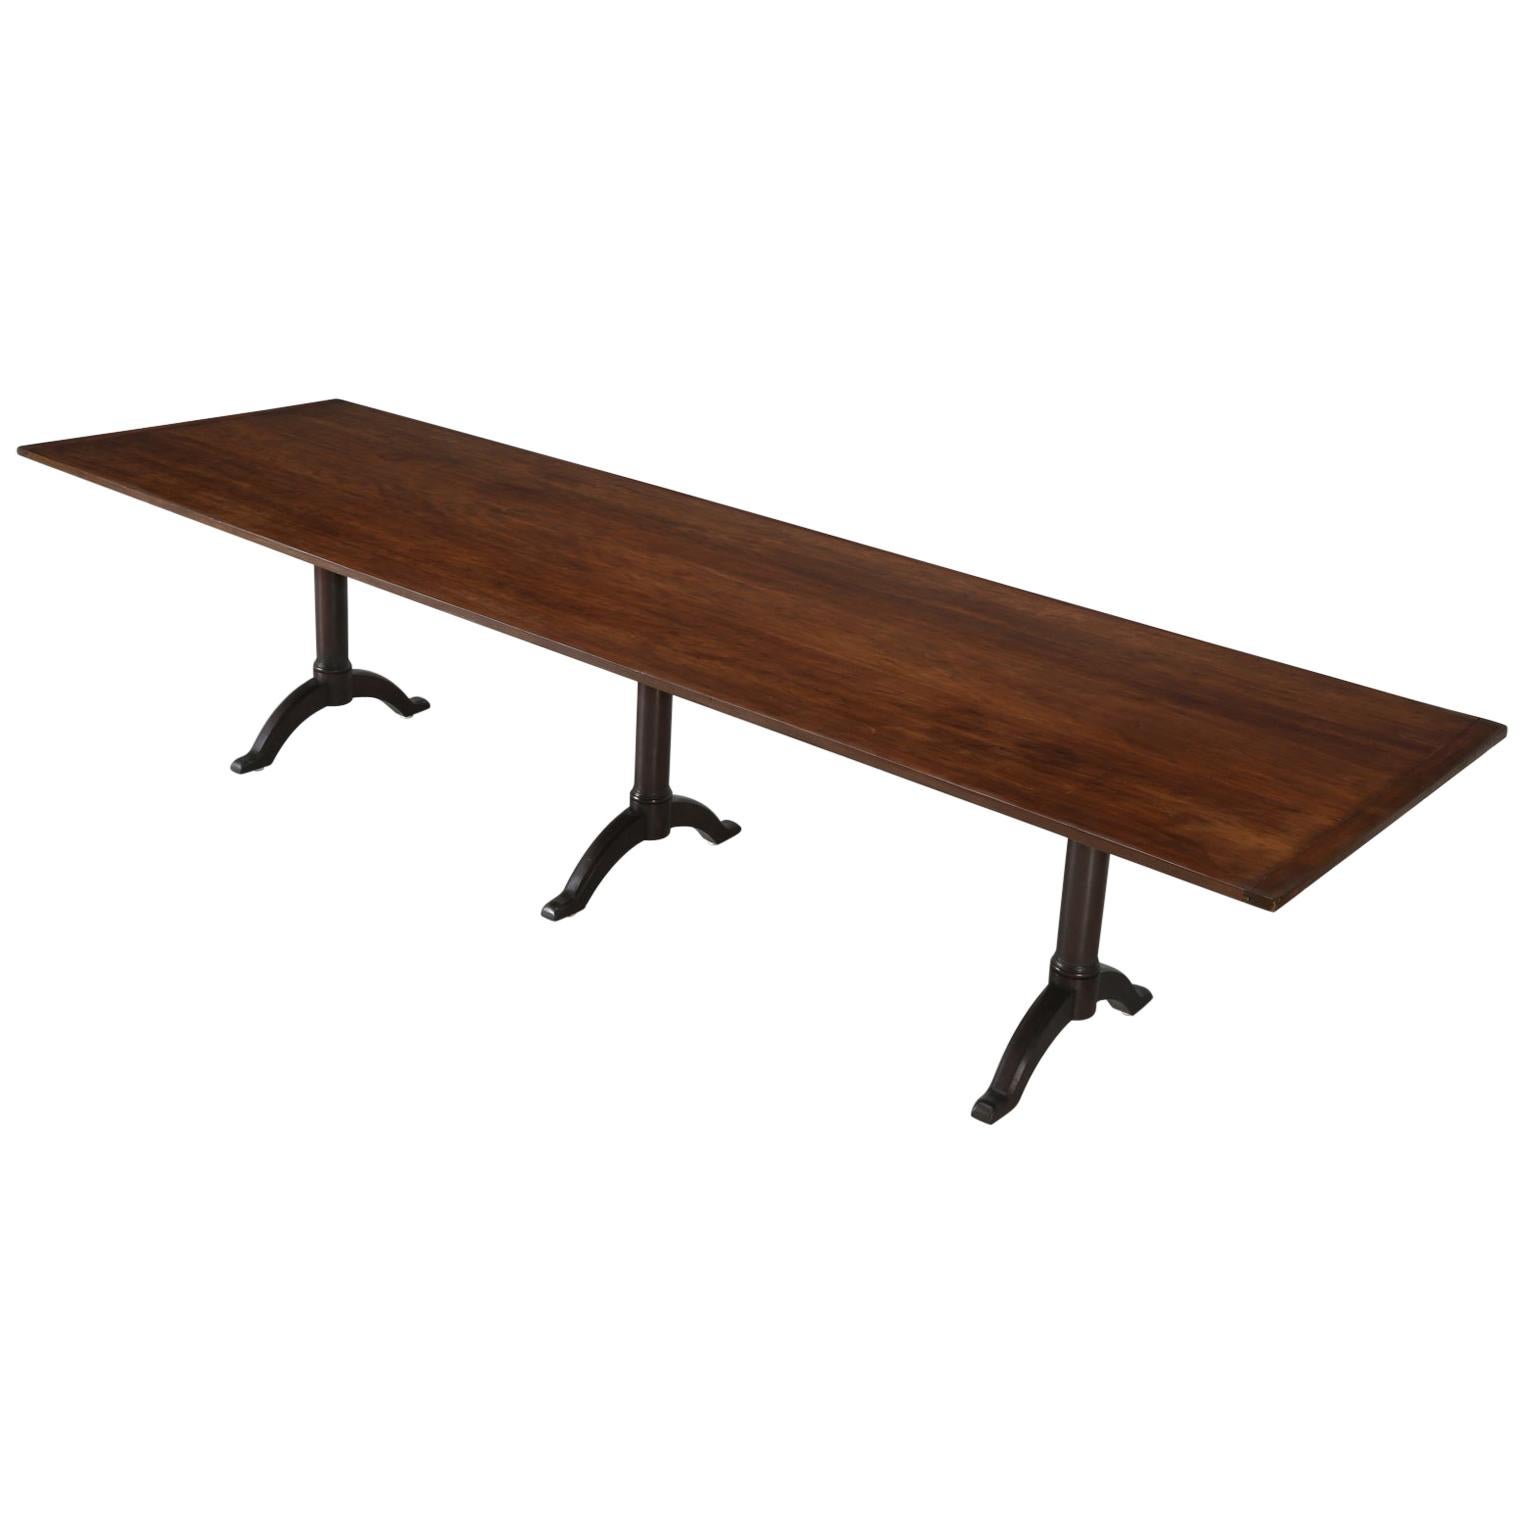 Antique Shaker Cherry Wood Trestle Dining Table, circa 1830